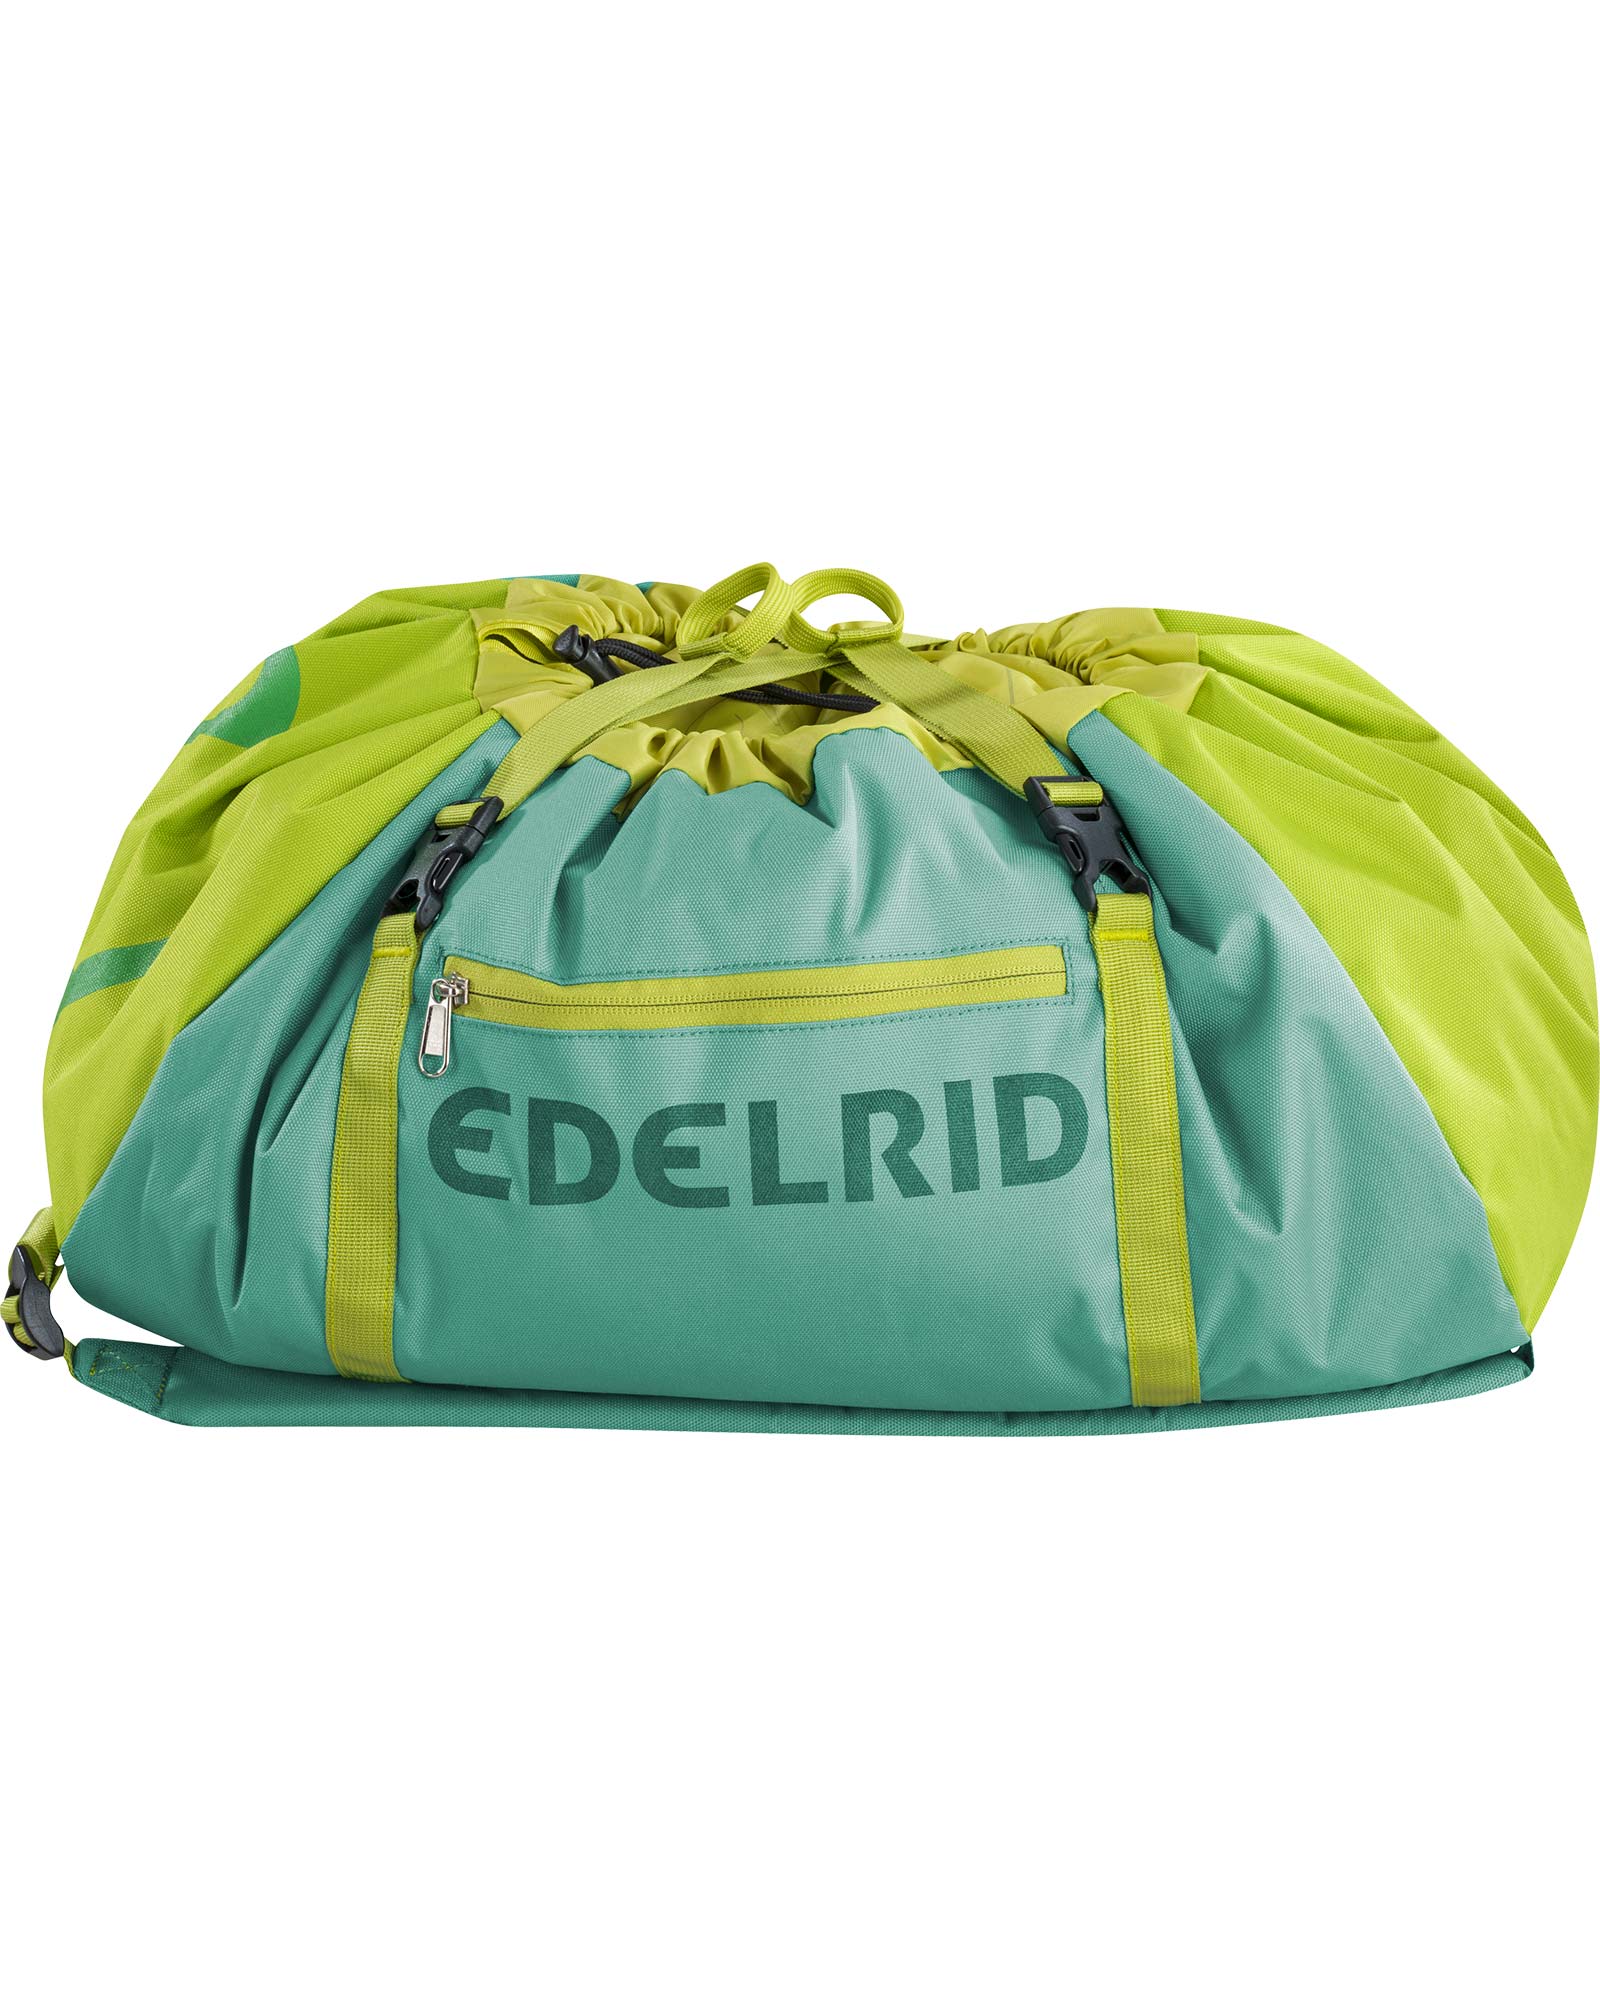 Edelrid Drone Rope Bag - Assorted colours